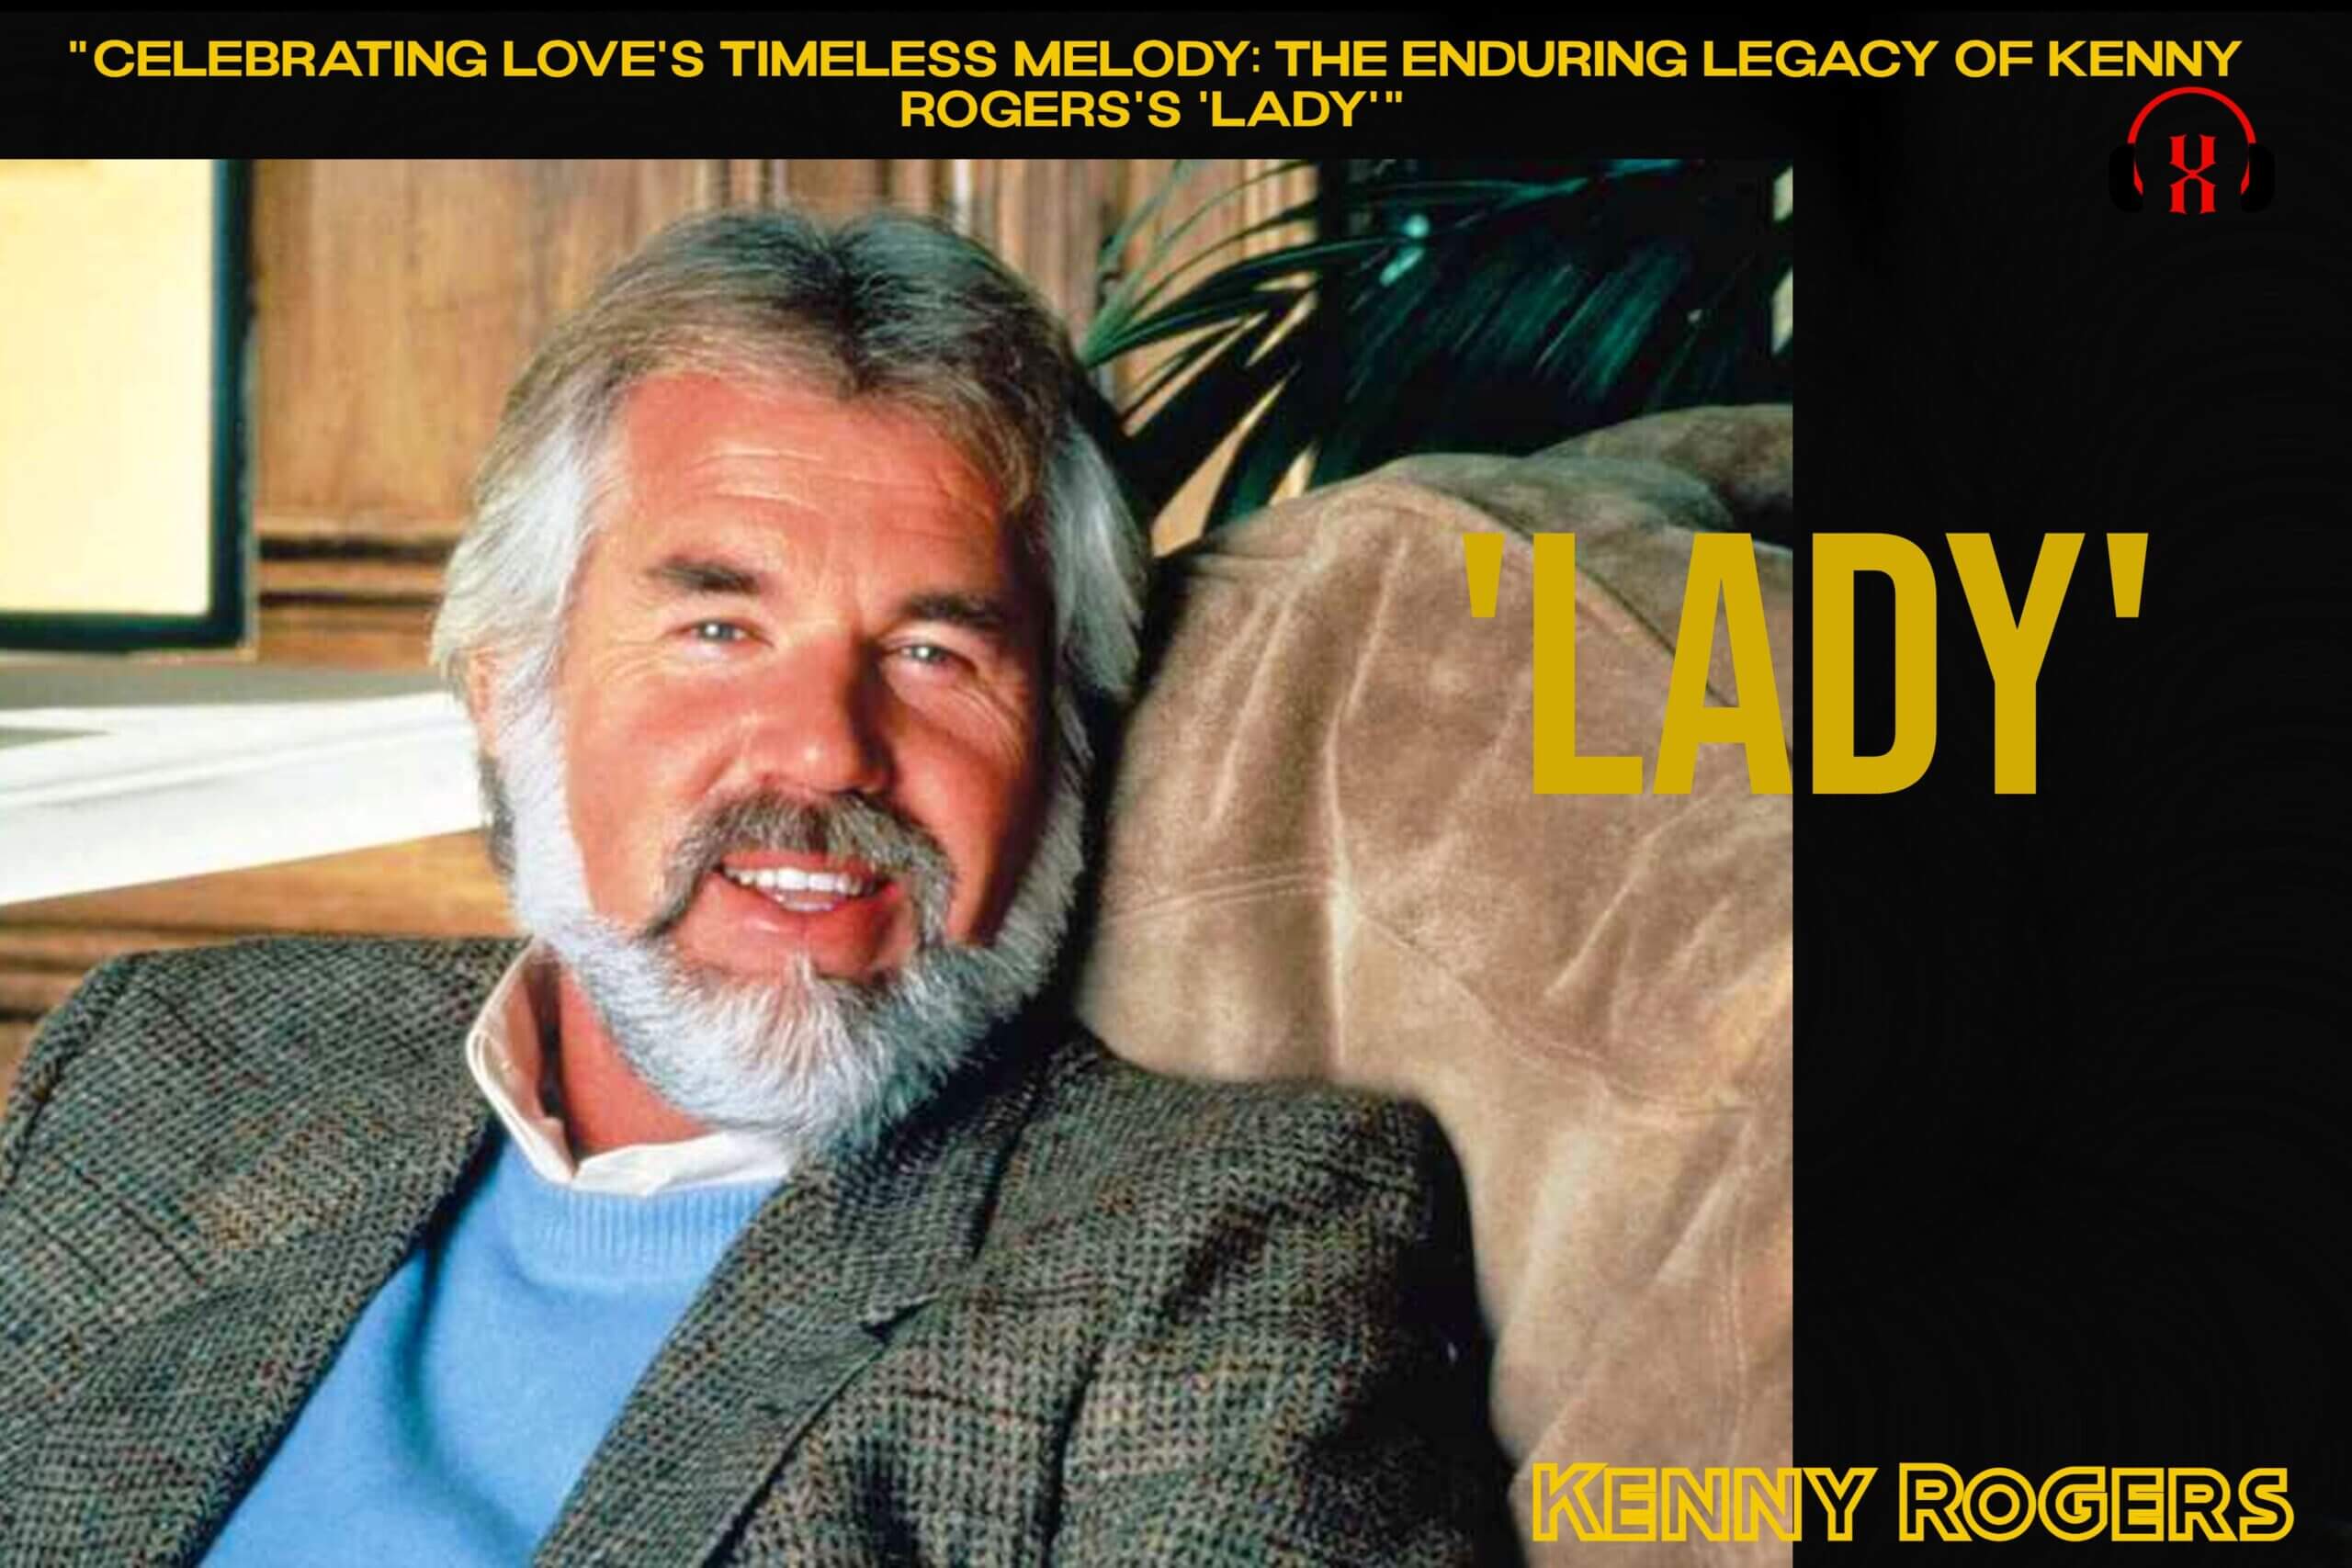 Kenny Rogers's 'Lady'"